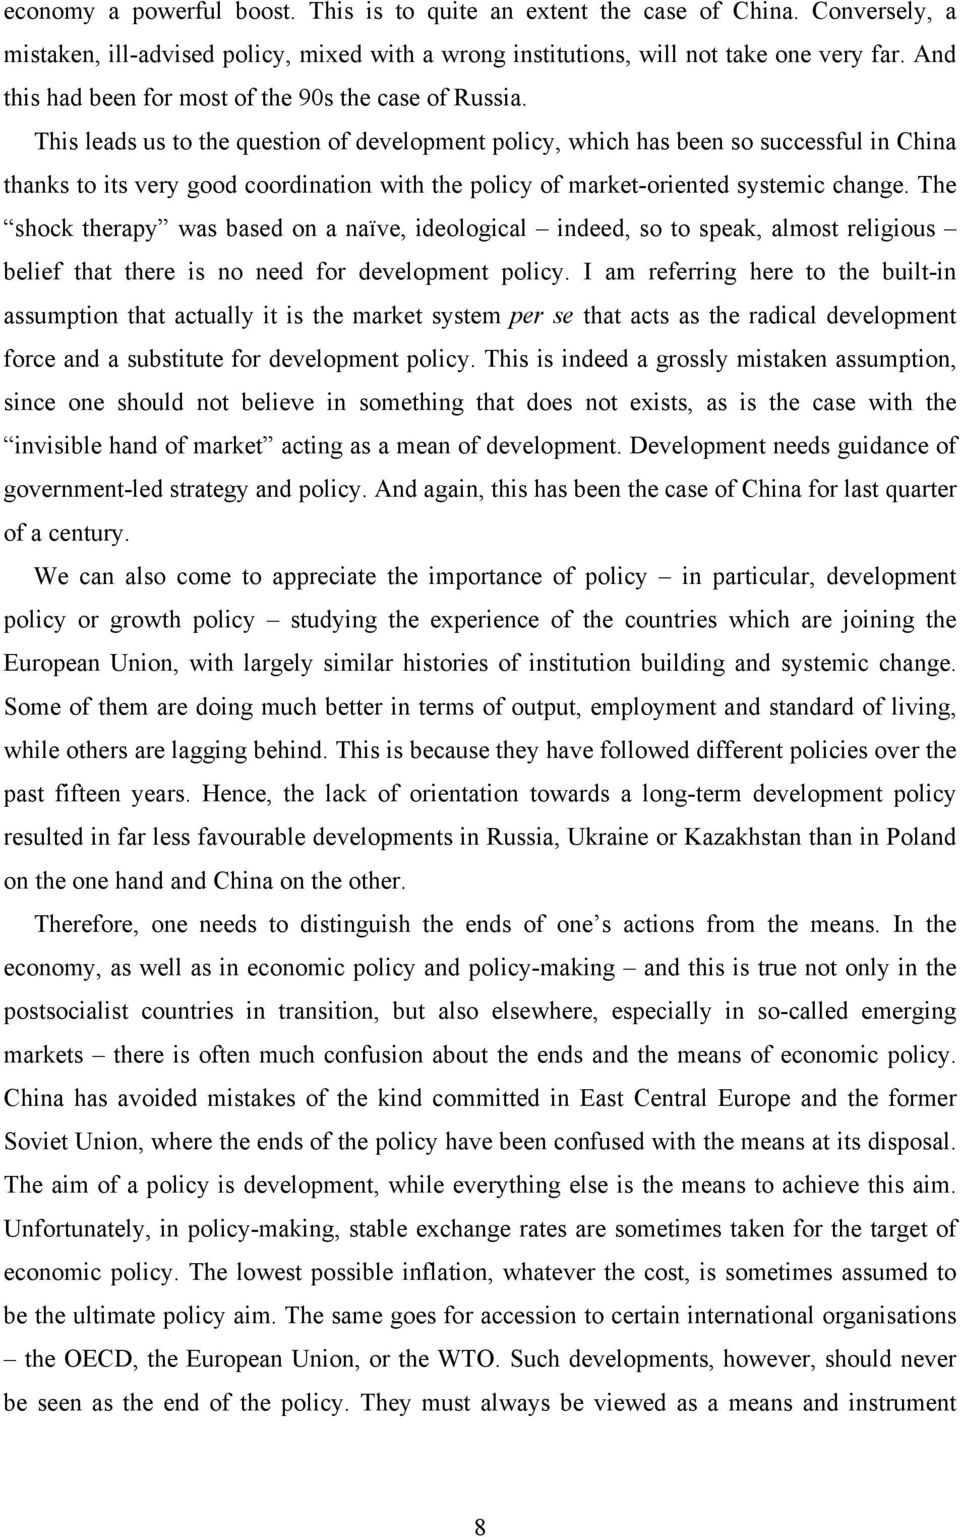 This leads us to the question of development policy, which has been so successful in China thanks to its very good coordination with the policy of market-oriented systemic change.